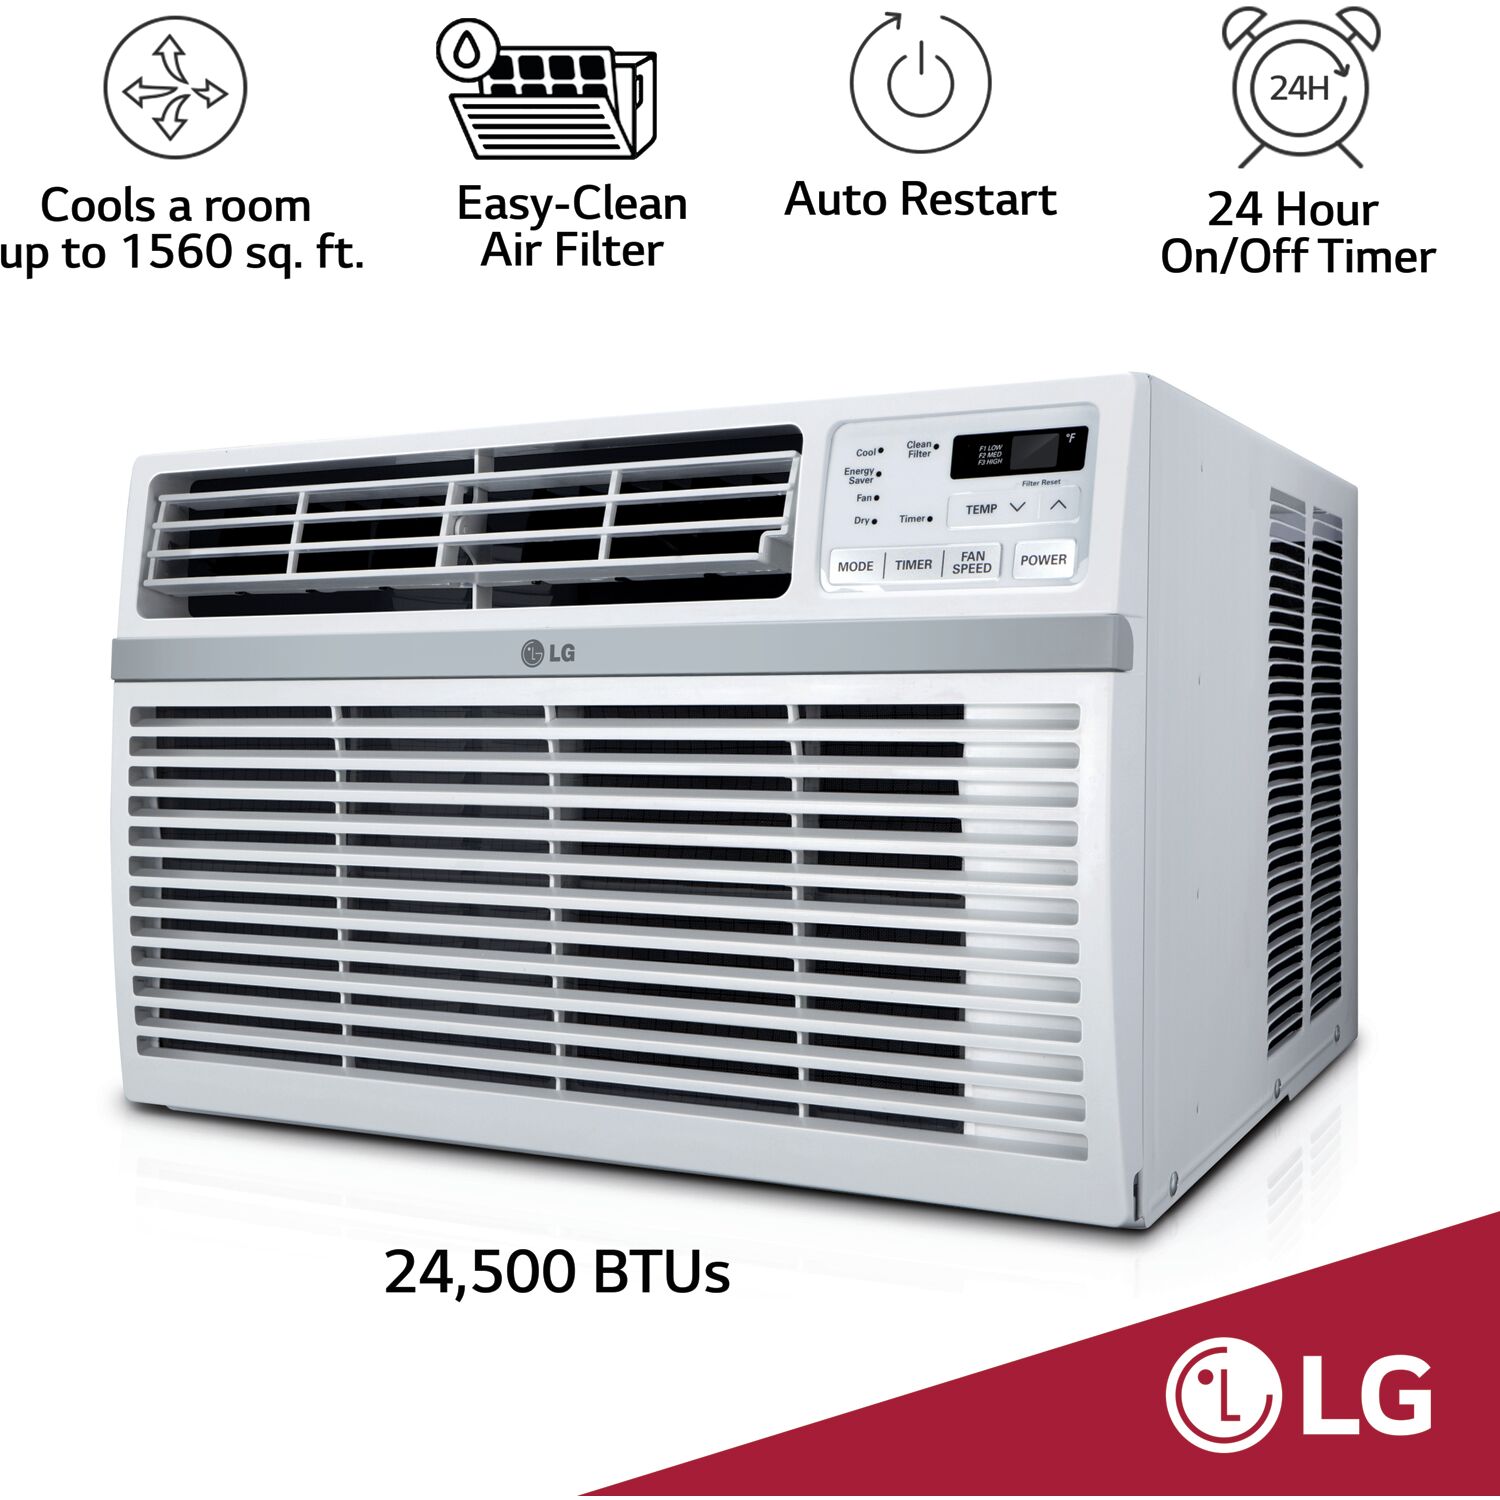 LG 24,500 BTU Window Air Conditioner, 1,560 Sq.ft. (39'x40' Room Size), Remote, 230/208V - image 5 of 11